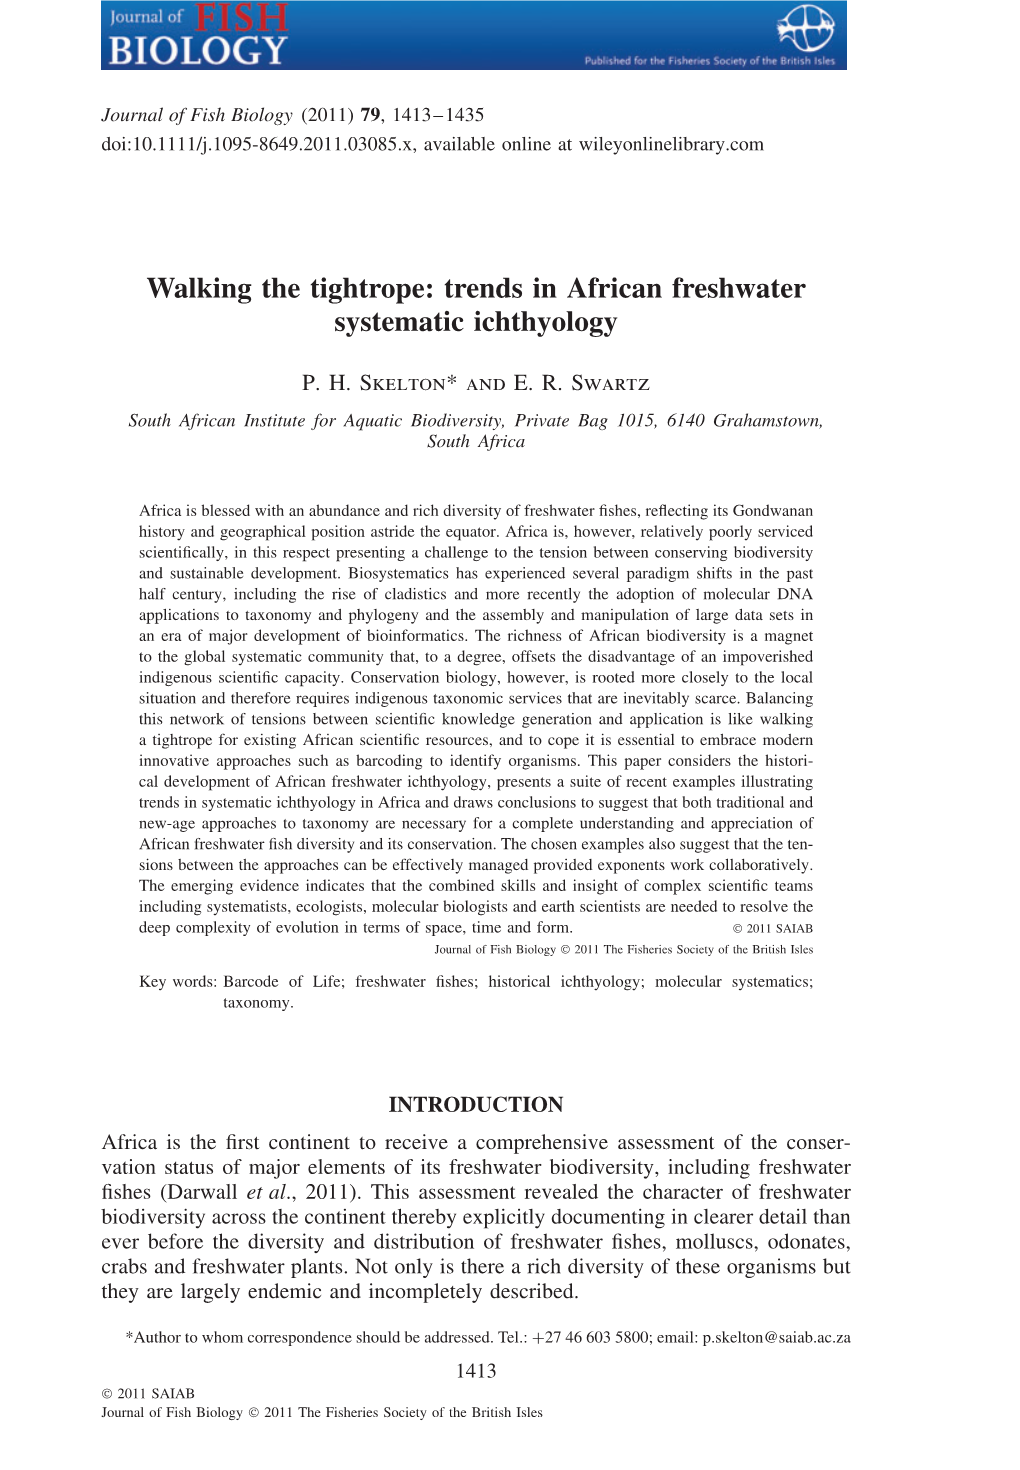 Walking the Tightrope: Trends in African Freshwater Systematic Ichthyology